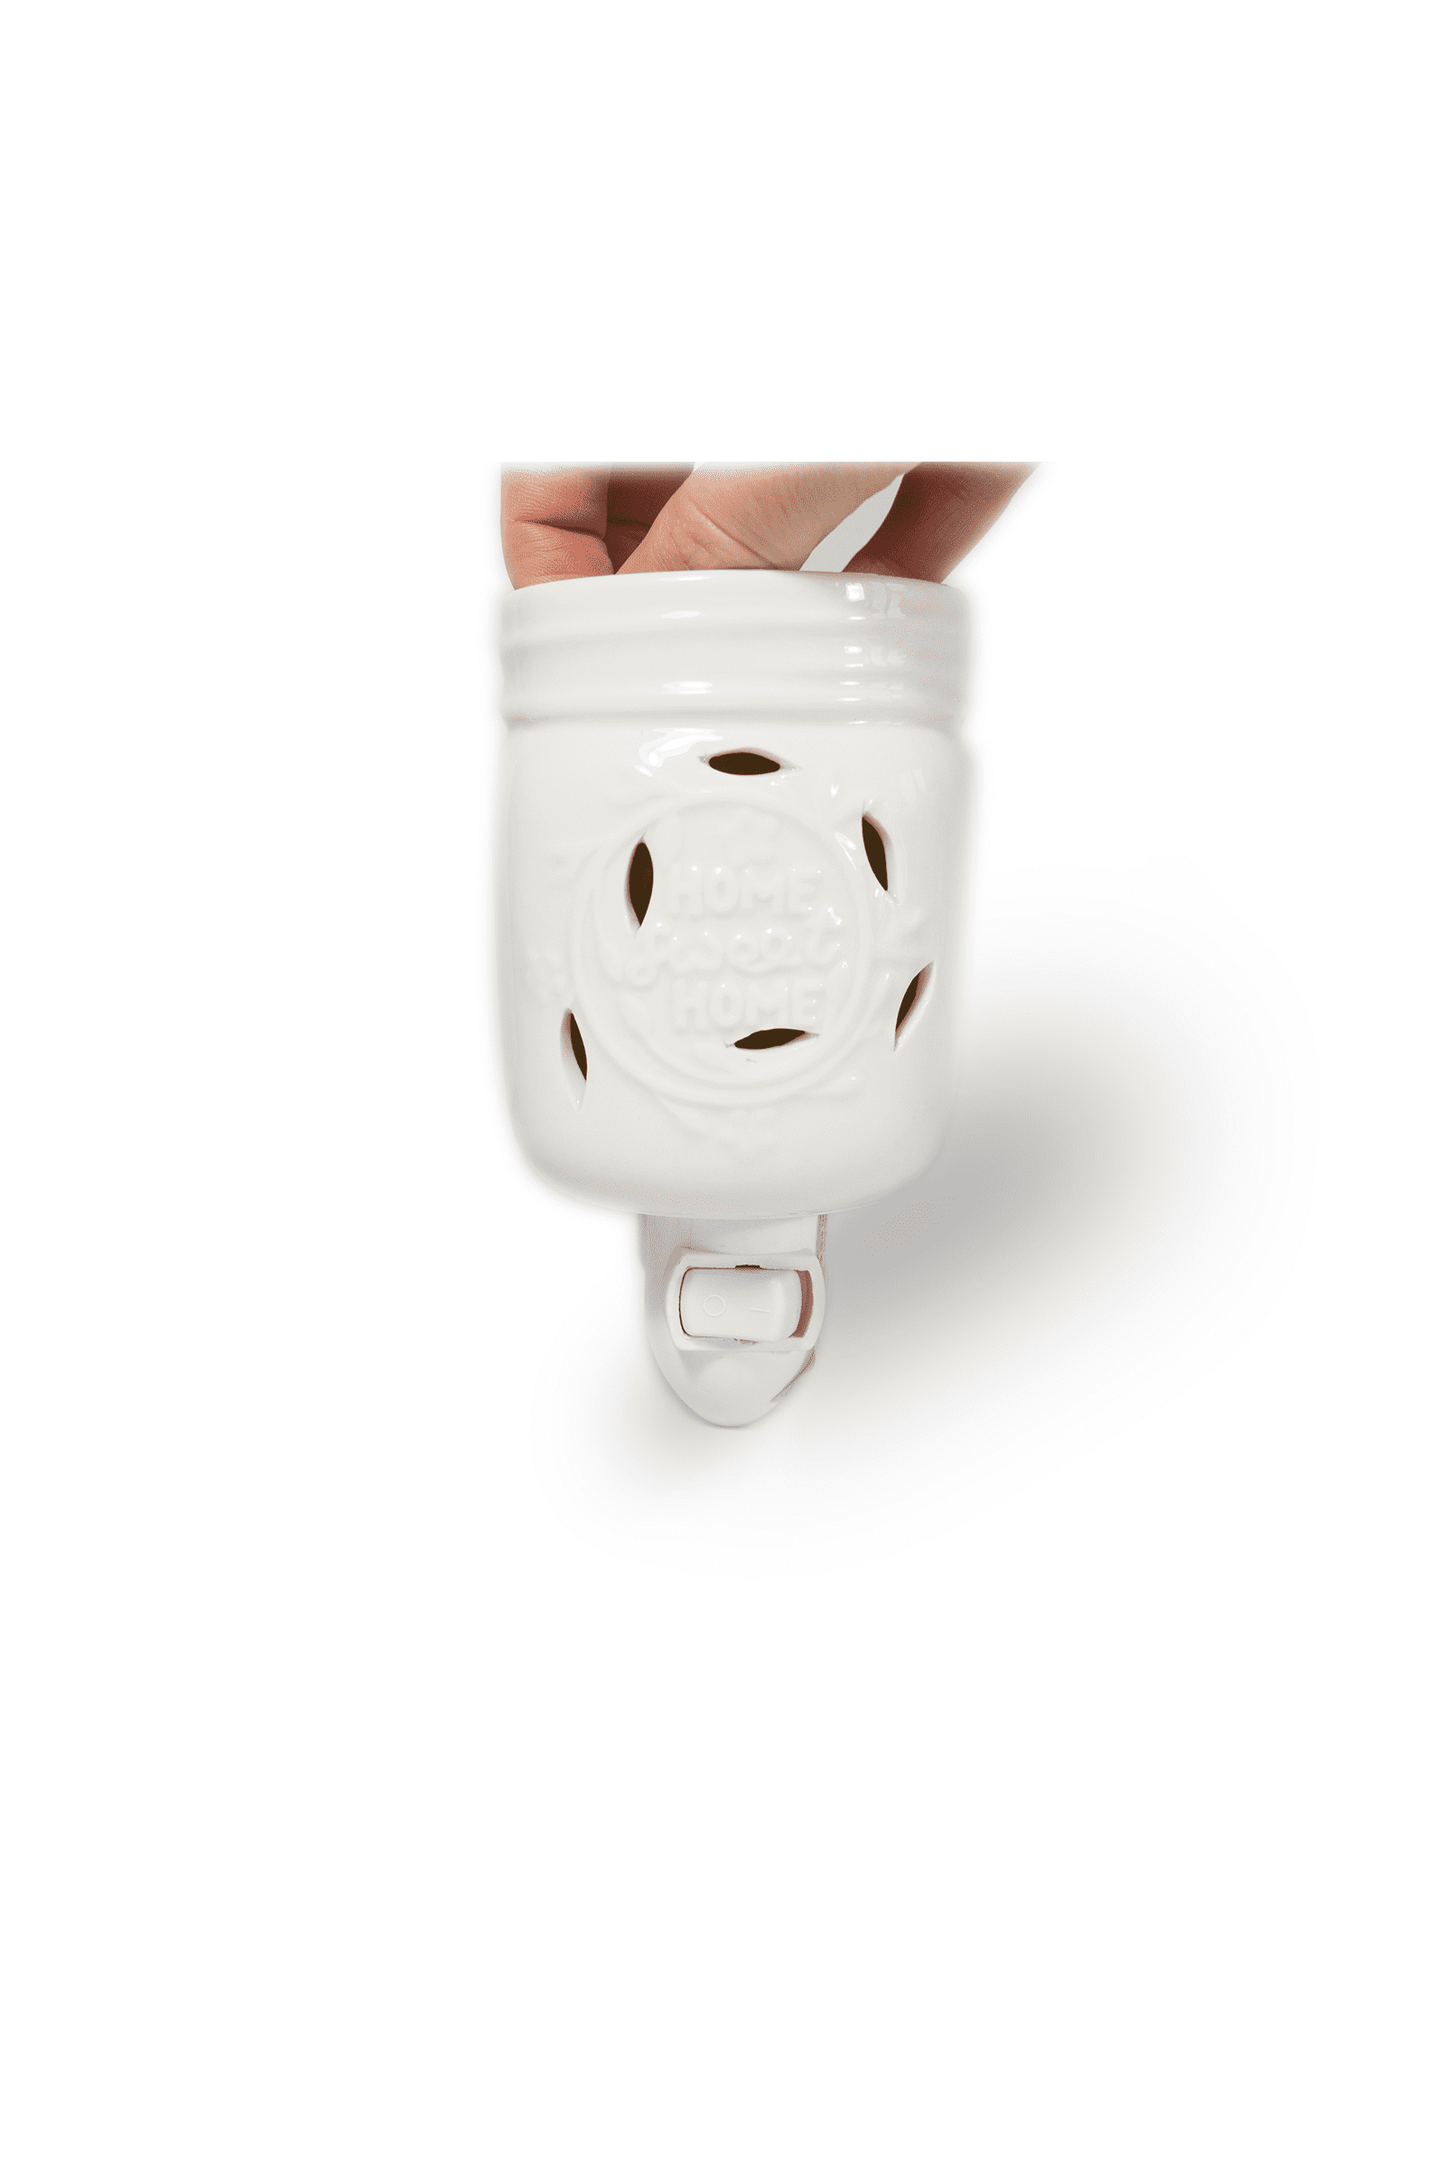 Wax Melter Plug In HOME SWEET HOME